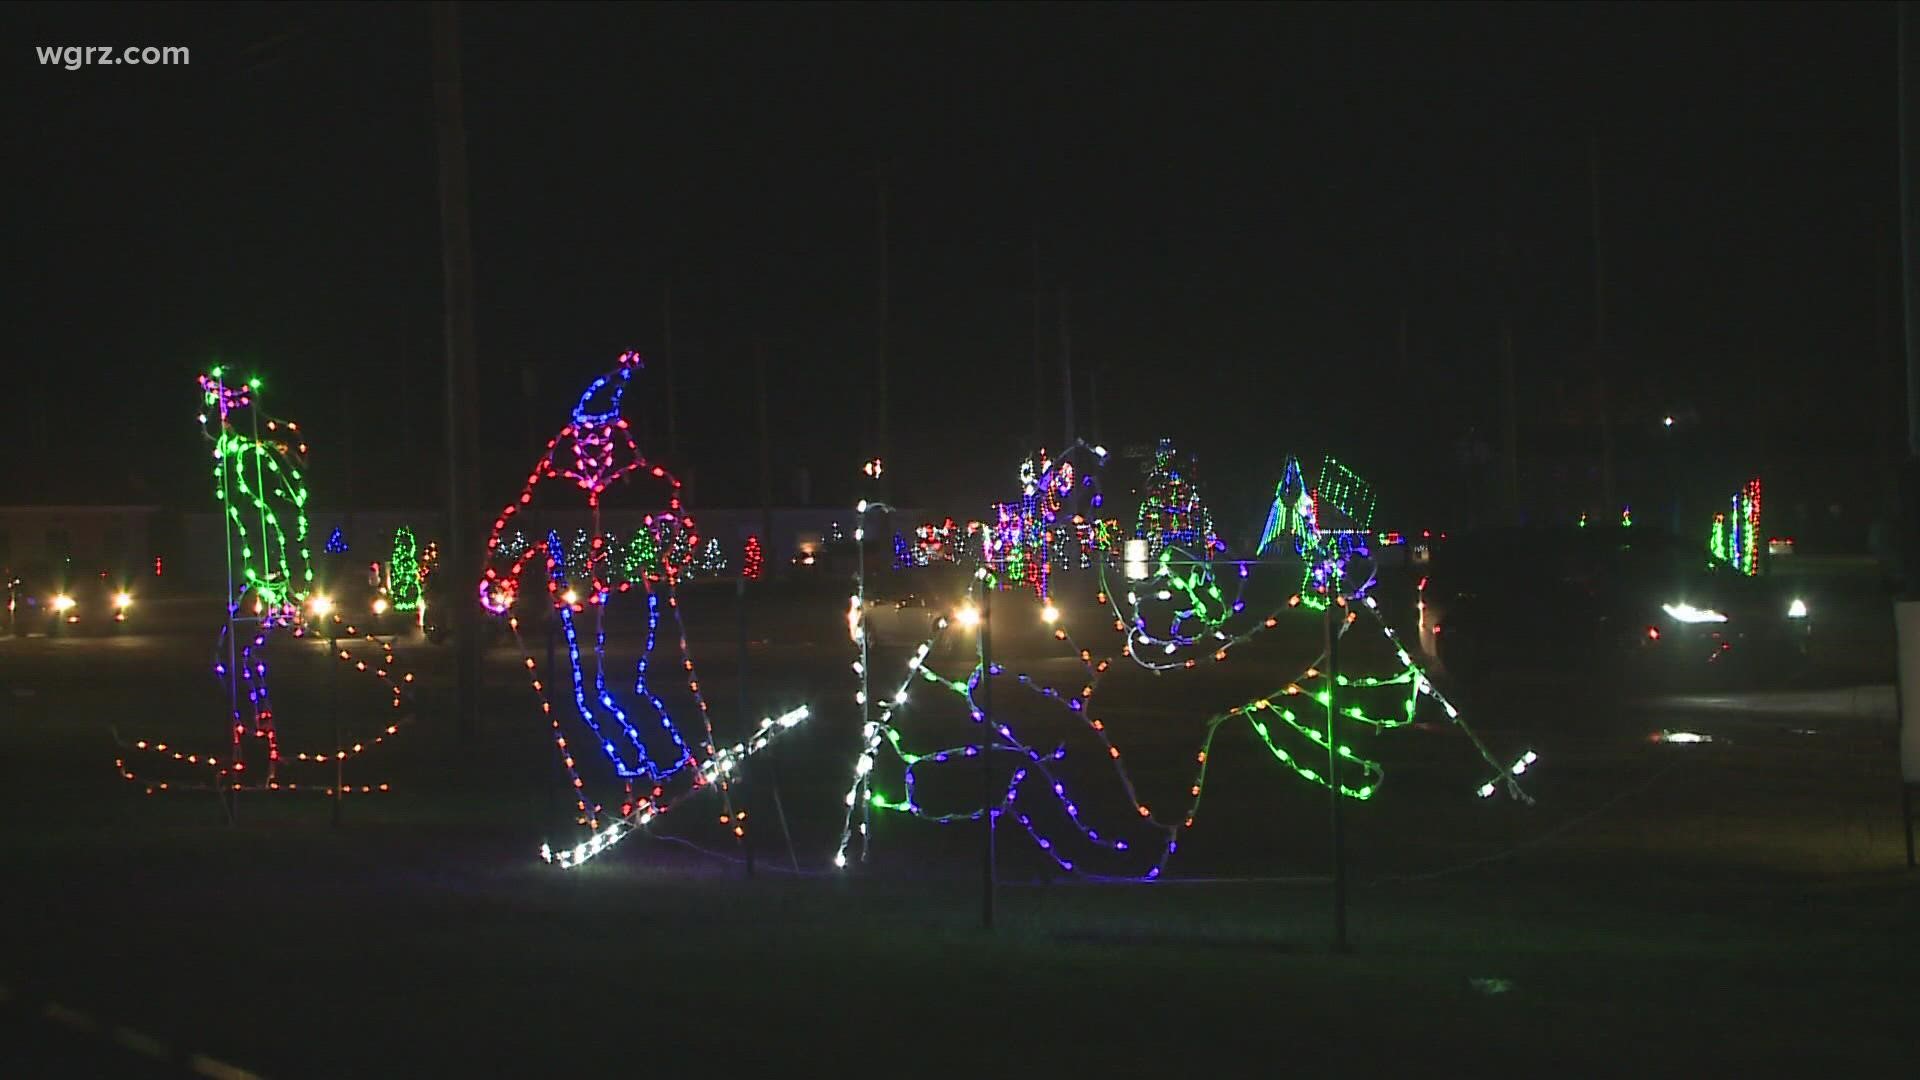 Fairgrounds Festival of Lights will not be opening tomorrow due to high wind gusts